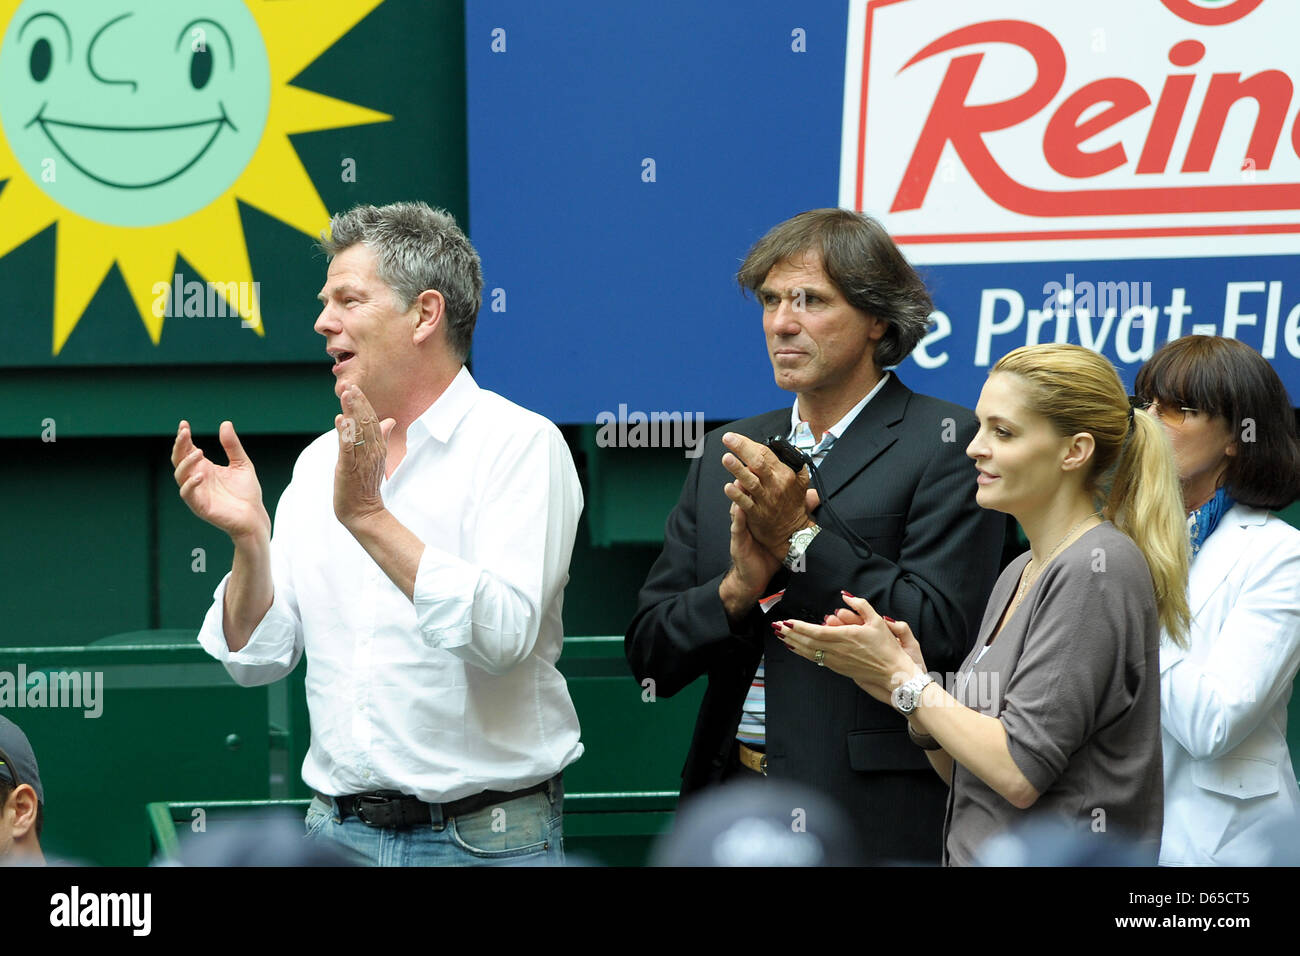 German tennis player Haas' father in law David Foster (L), father Peter Haas (C), mother Brigitte Haas (R) and wife Sara Foster applaud after Hass' victory of the final of the ATP tournament Gerry Weber Open over Federer from Switzerland in Halle/Westfalen, Germany, 17 June 2012. Photo: Christian Weische Stock Photo